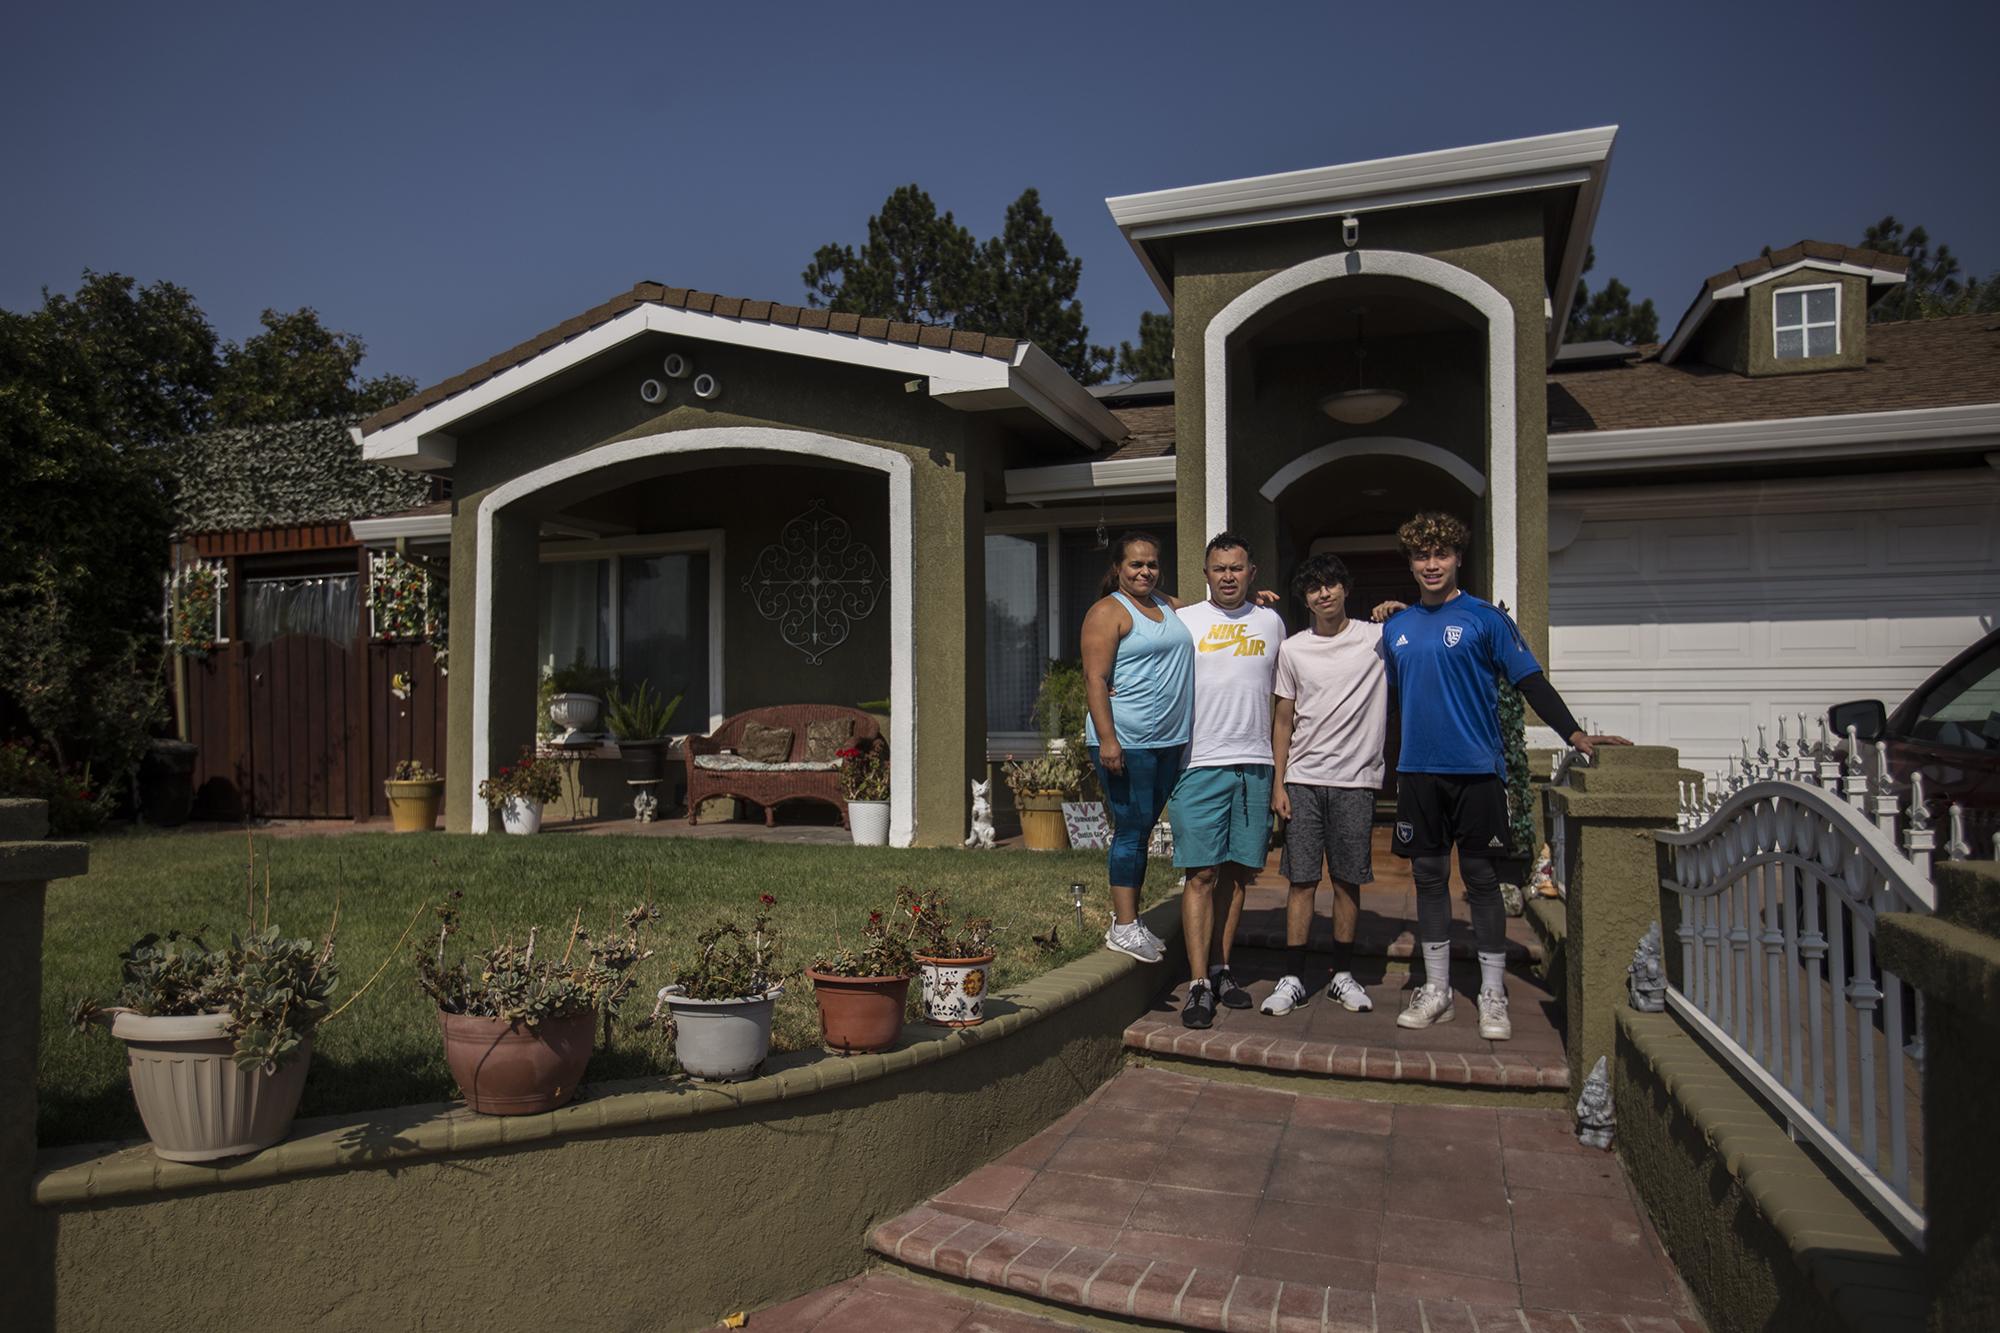 The Alguera Mercado family at their home in San José, California. Edgar Alguera moved to the United States without papers in 1994, but he and his wife gained Temporary Protective Status (TPS) after the 2001 earthquake. A former soccer player in El Salvador, he now owns a construction contracting company and is the personal trainer of his son Damián (far right), who at just 17 snagged a spot as goalkeeper with La Selecta.